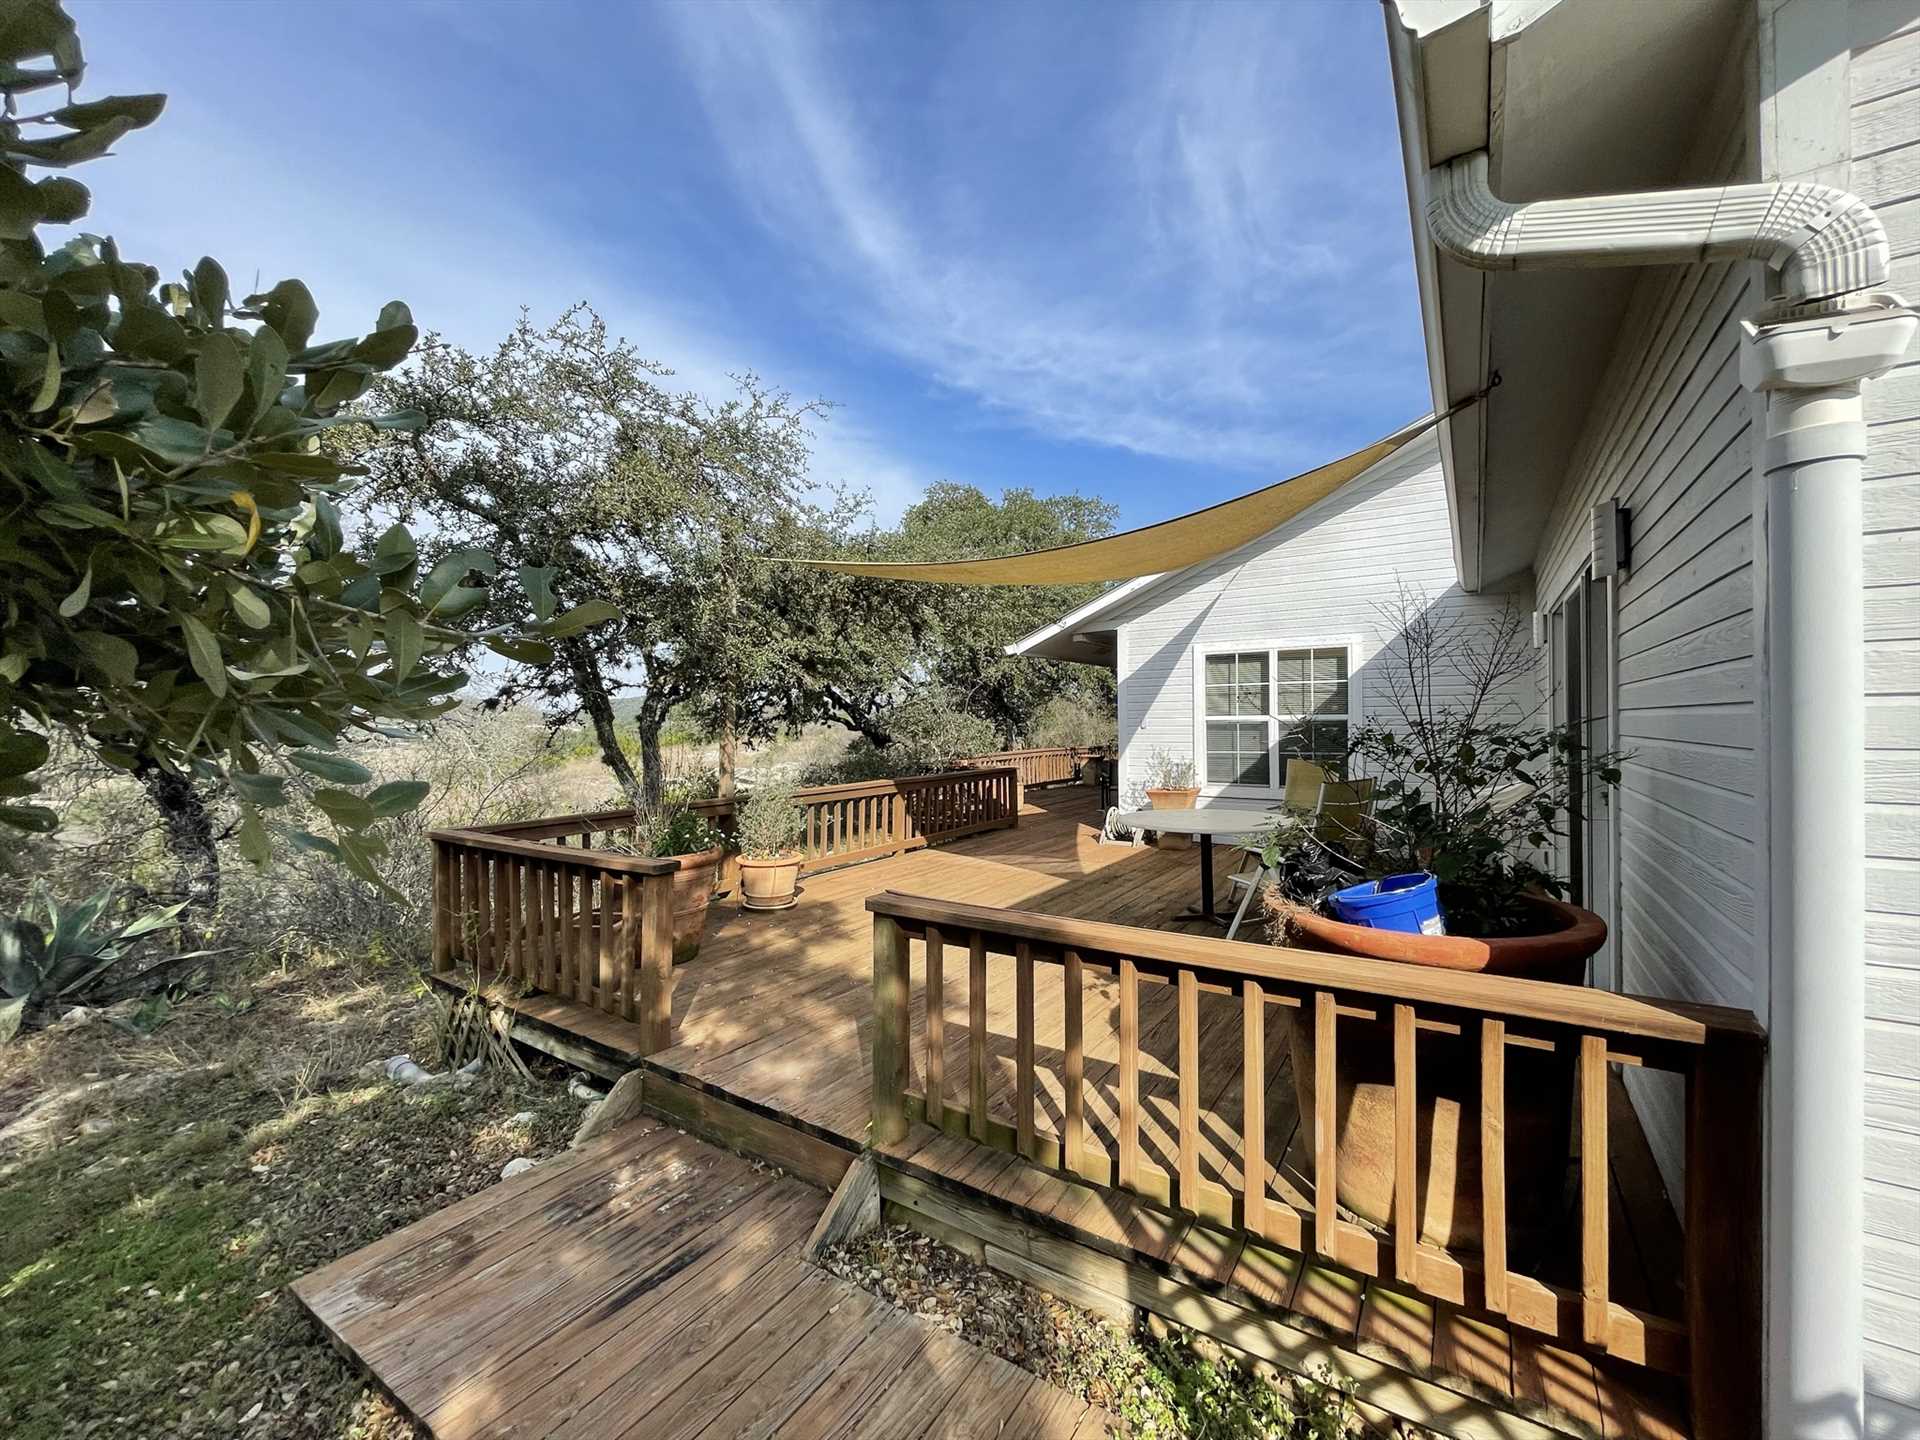                                                 A shady awning keeps the back deck comfy and cool, it's a great place to take in views of the ranch and the big and beautiful Hill Country.